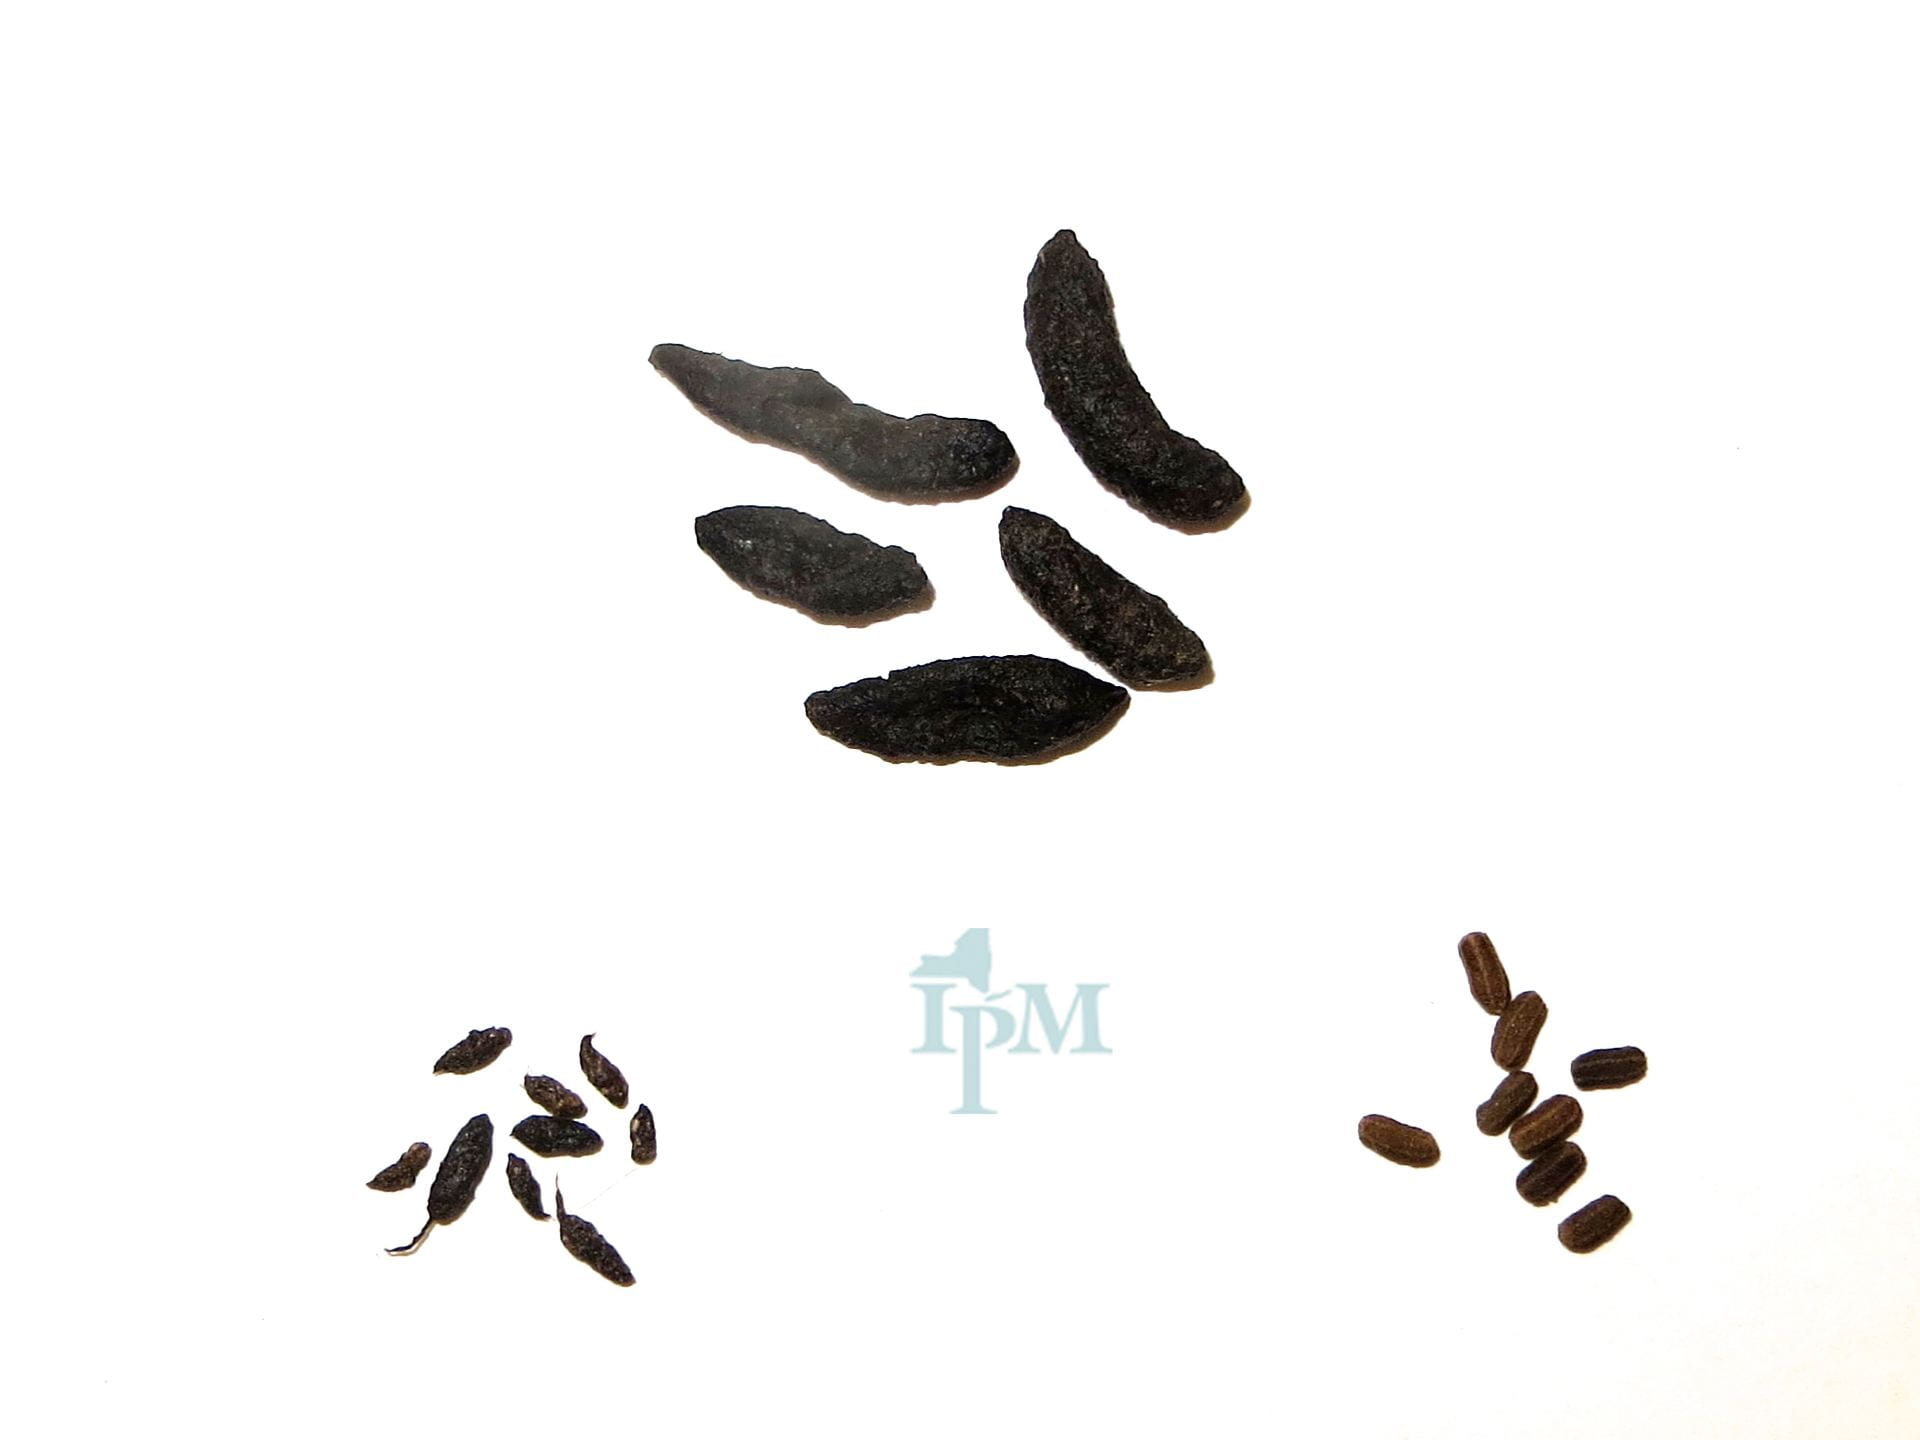 image shows three samples of pest droppings for comparison, rat, cockrock, mouse